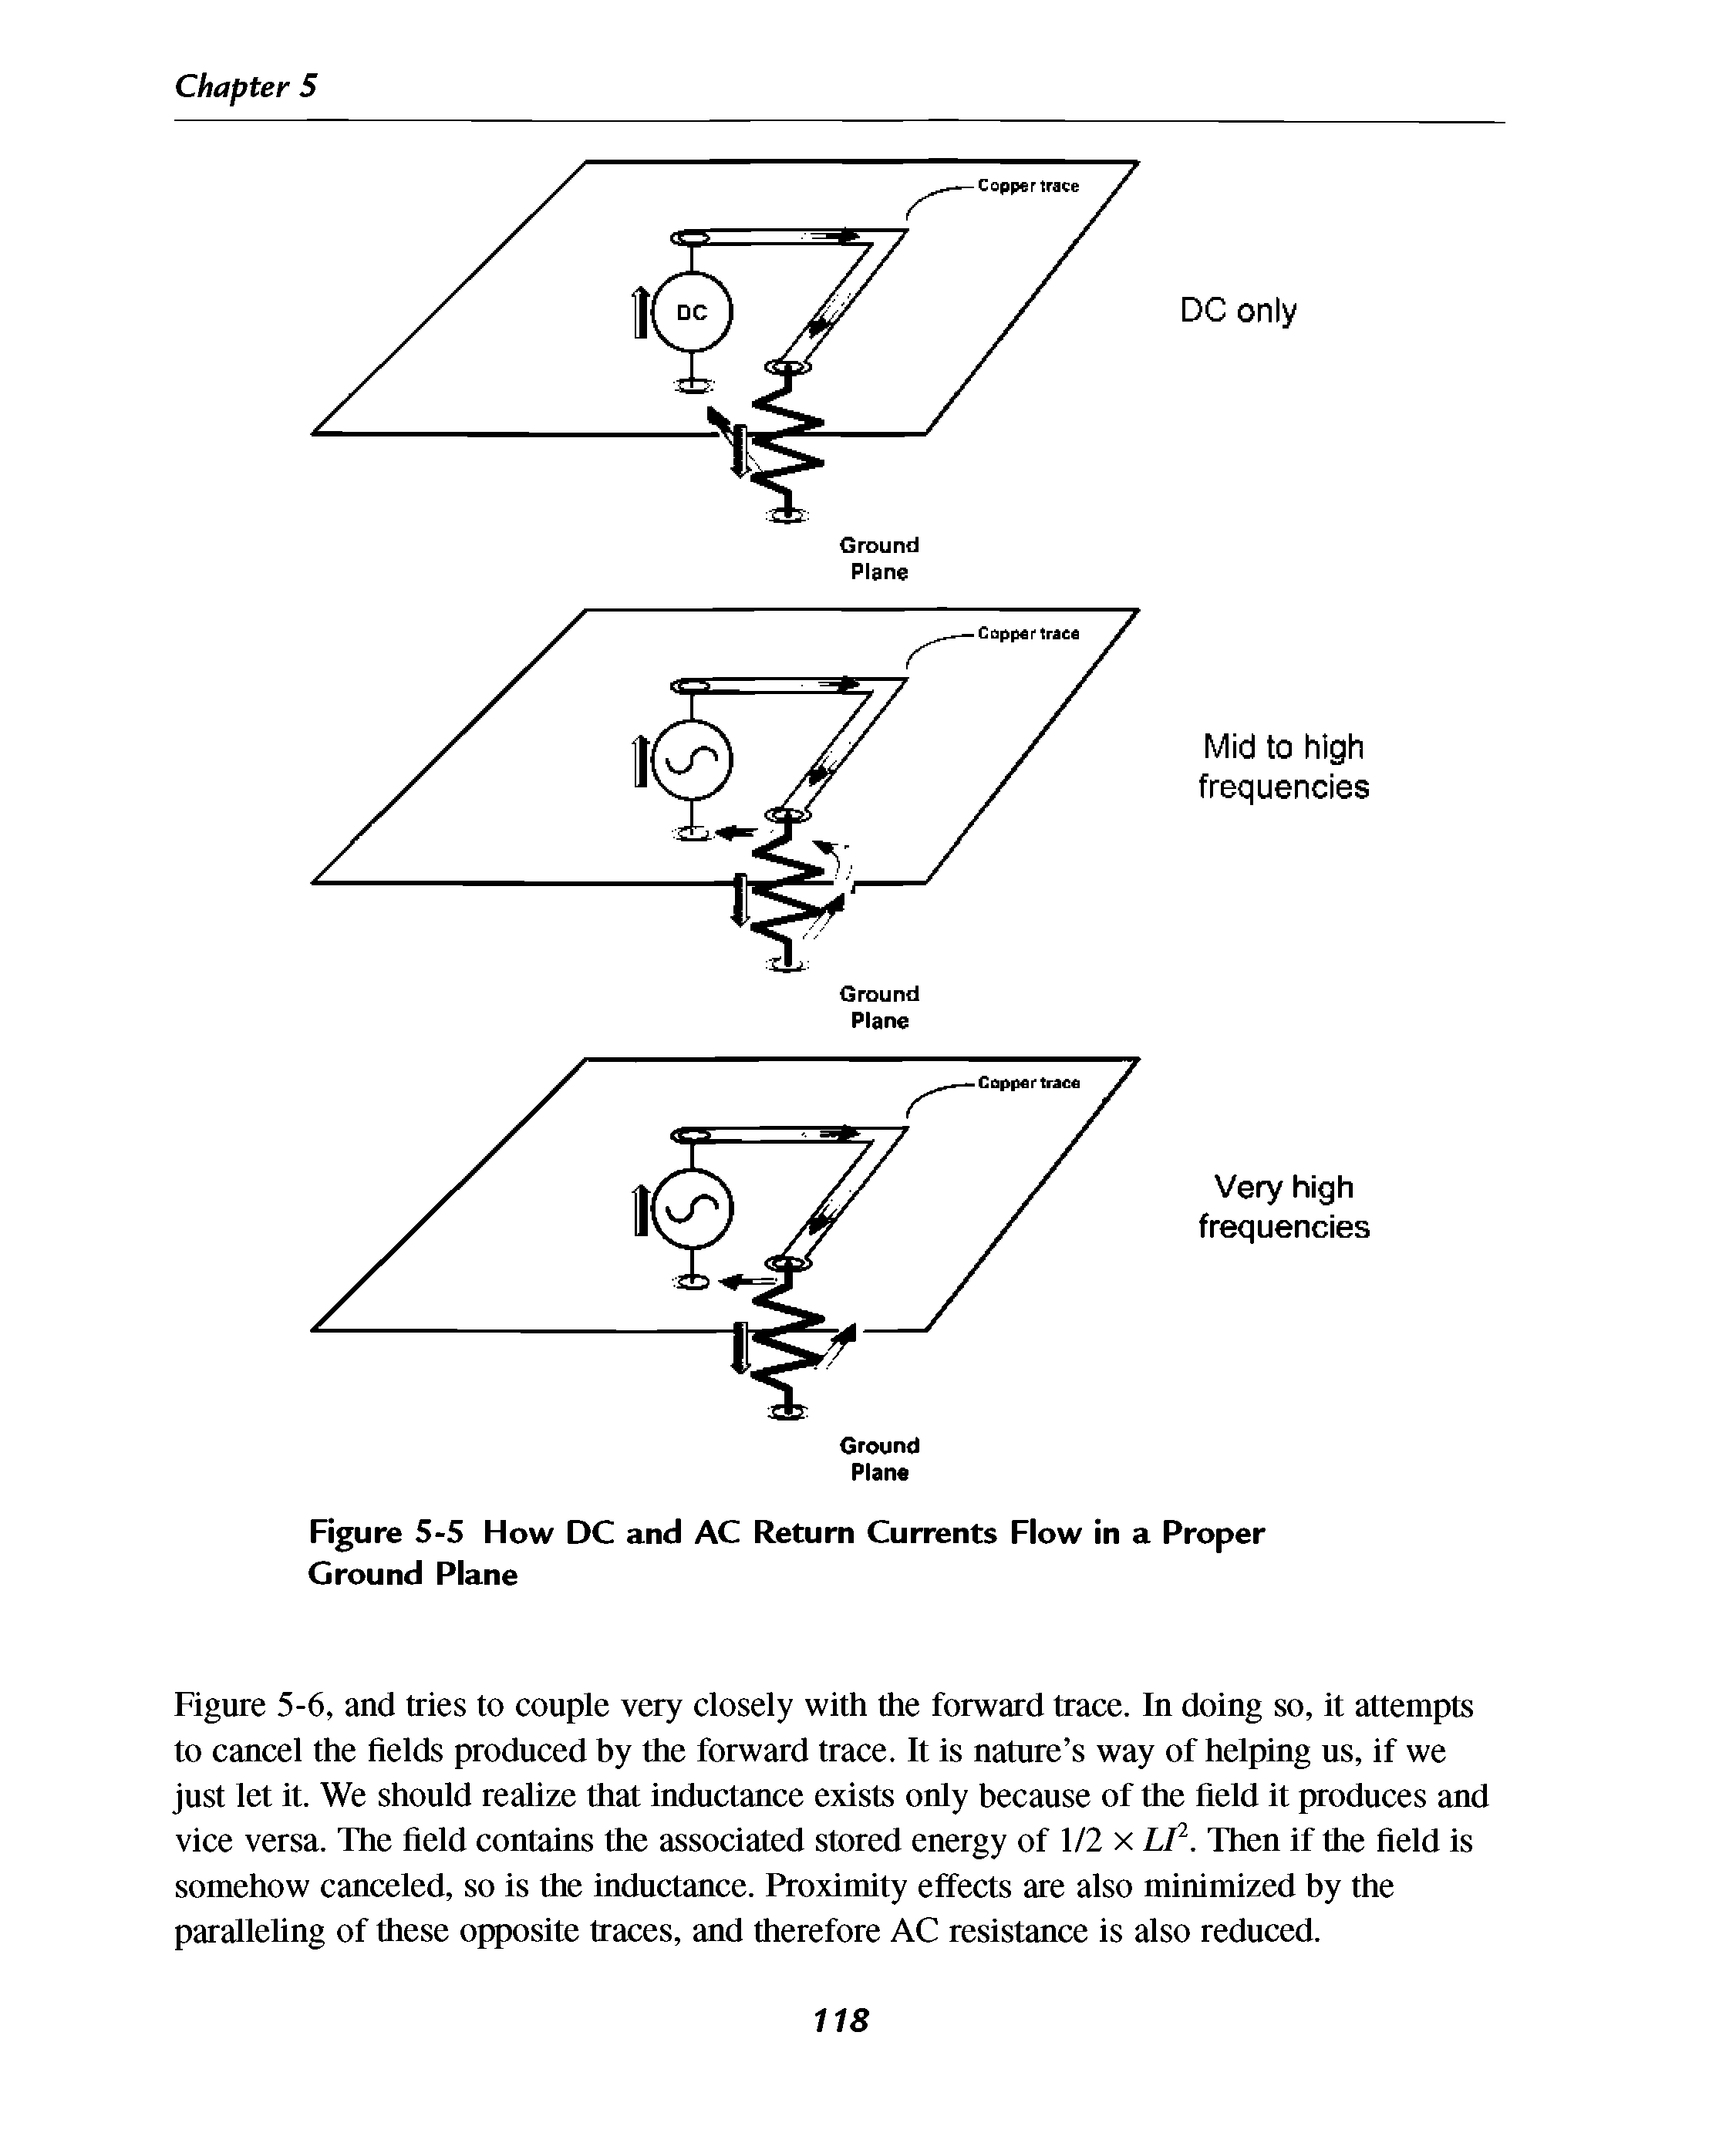 Figure 5-5 How DC and AC Return Currents Flow in a Proper Ground Plane...